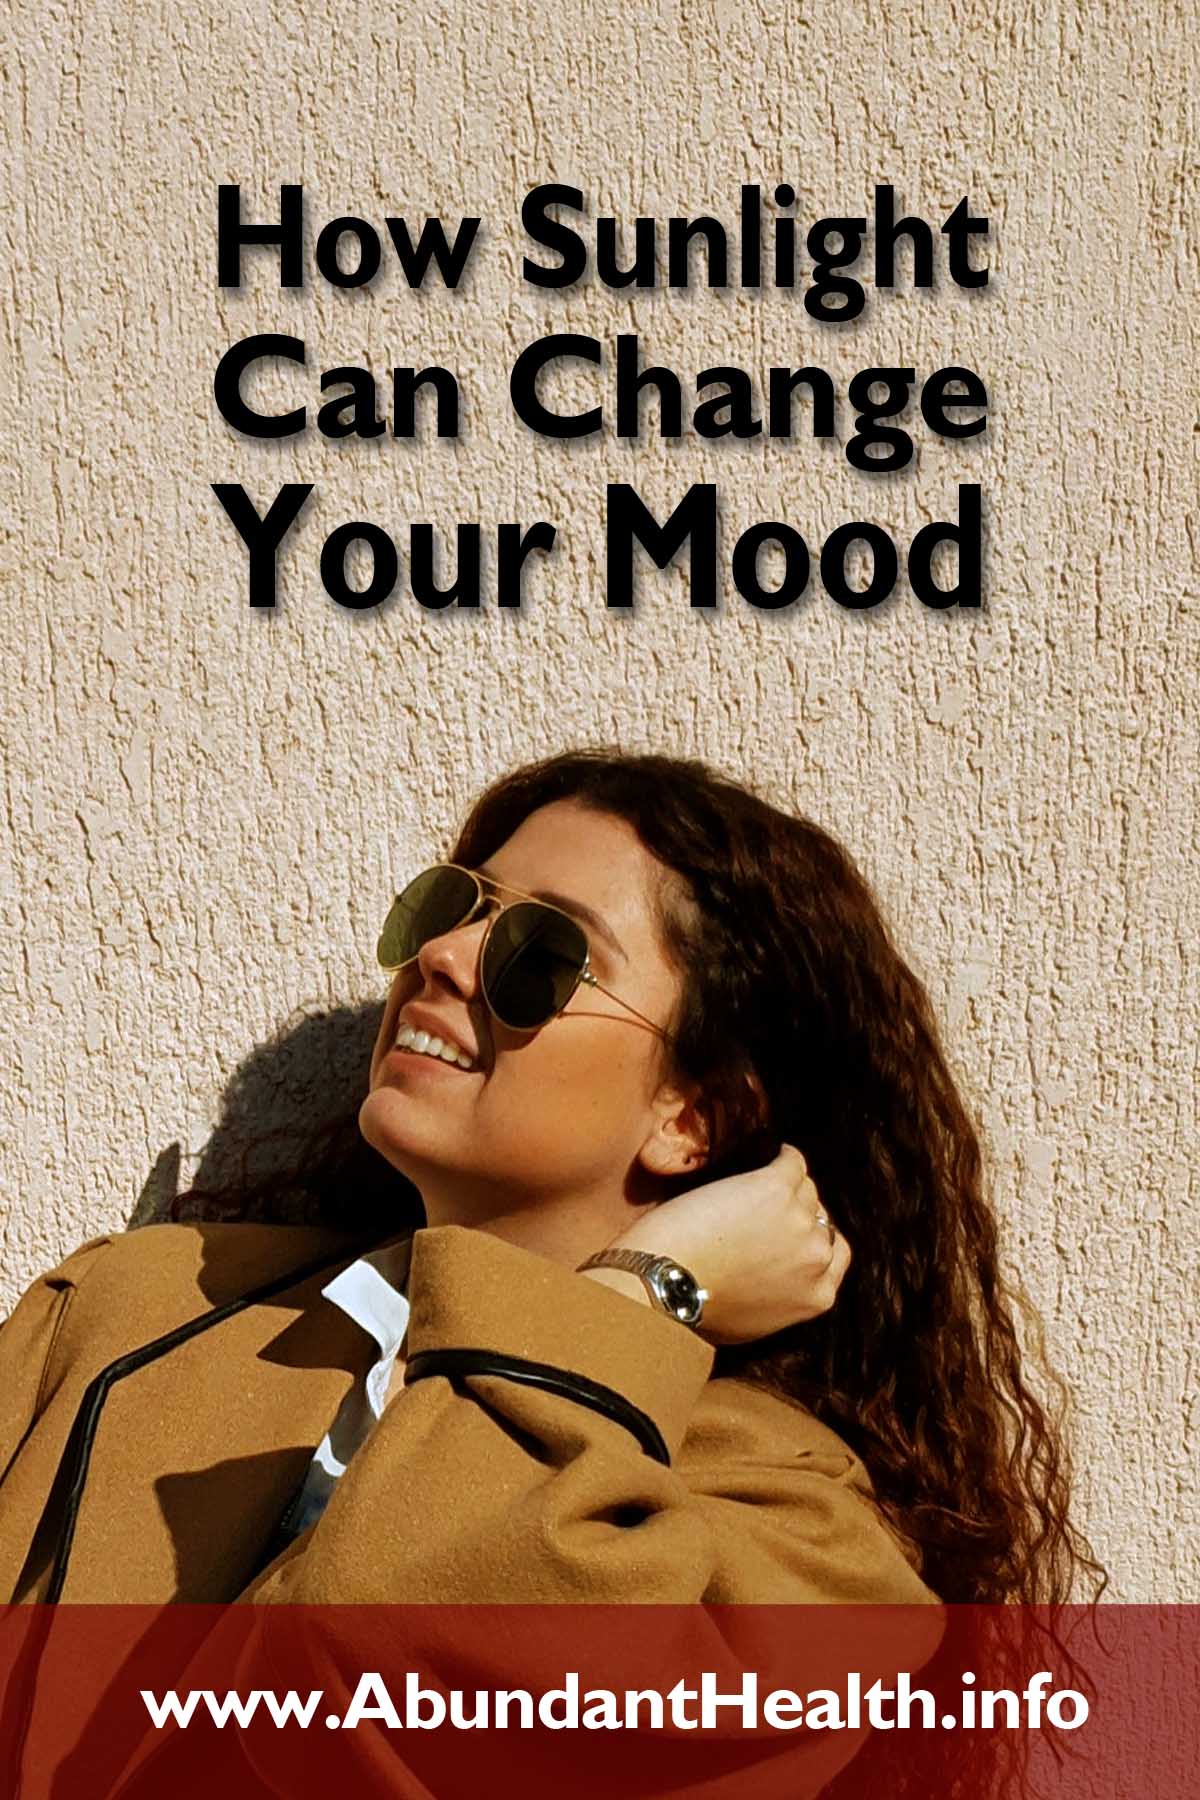 How Sunlight Can Change Your Mood